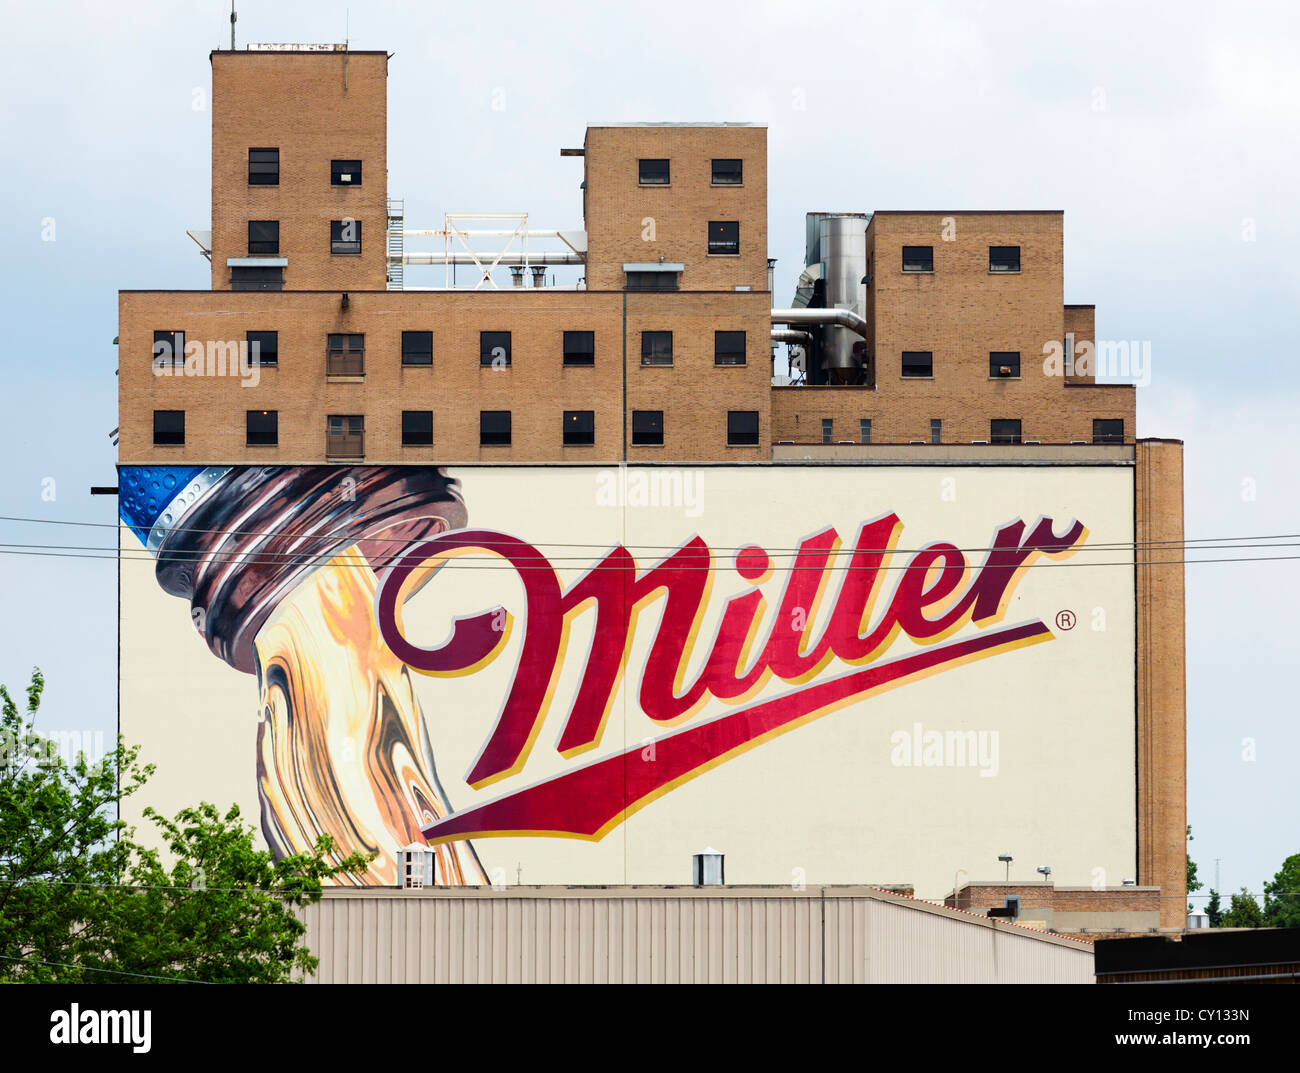 Miller Coors Brewery, West State Street, Milwaukee, Wisconsin, États-Unis Banque D'Images